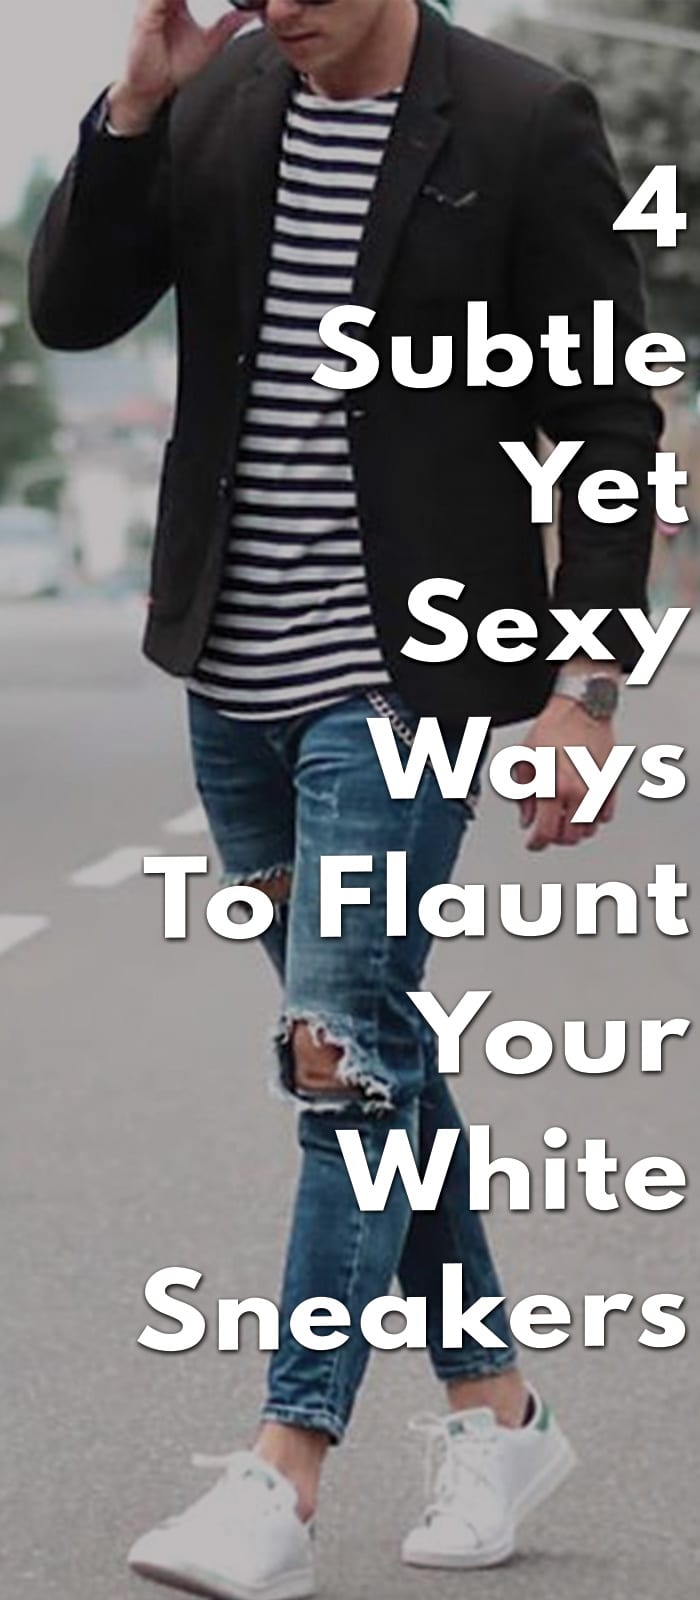 4-Subtle-Yet-Sexy-Ways-To-Flaunt-Your-White-Sneakers